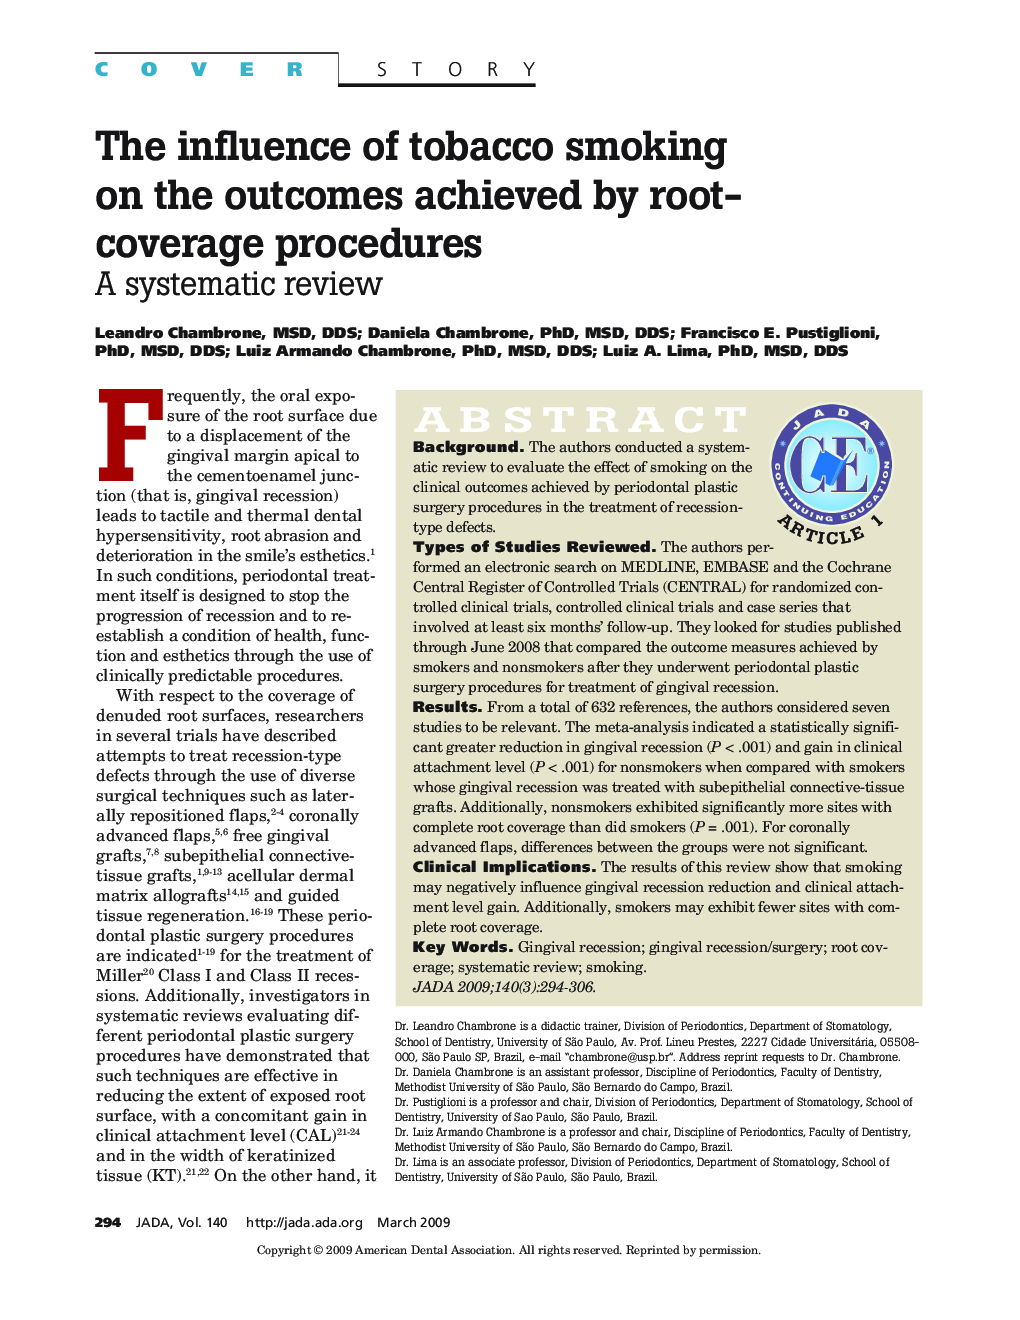 The Influence of Tobacco Smoking on the Outcomes Achieved by Root-Coverage Procedures : A Systematic Review